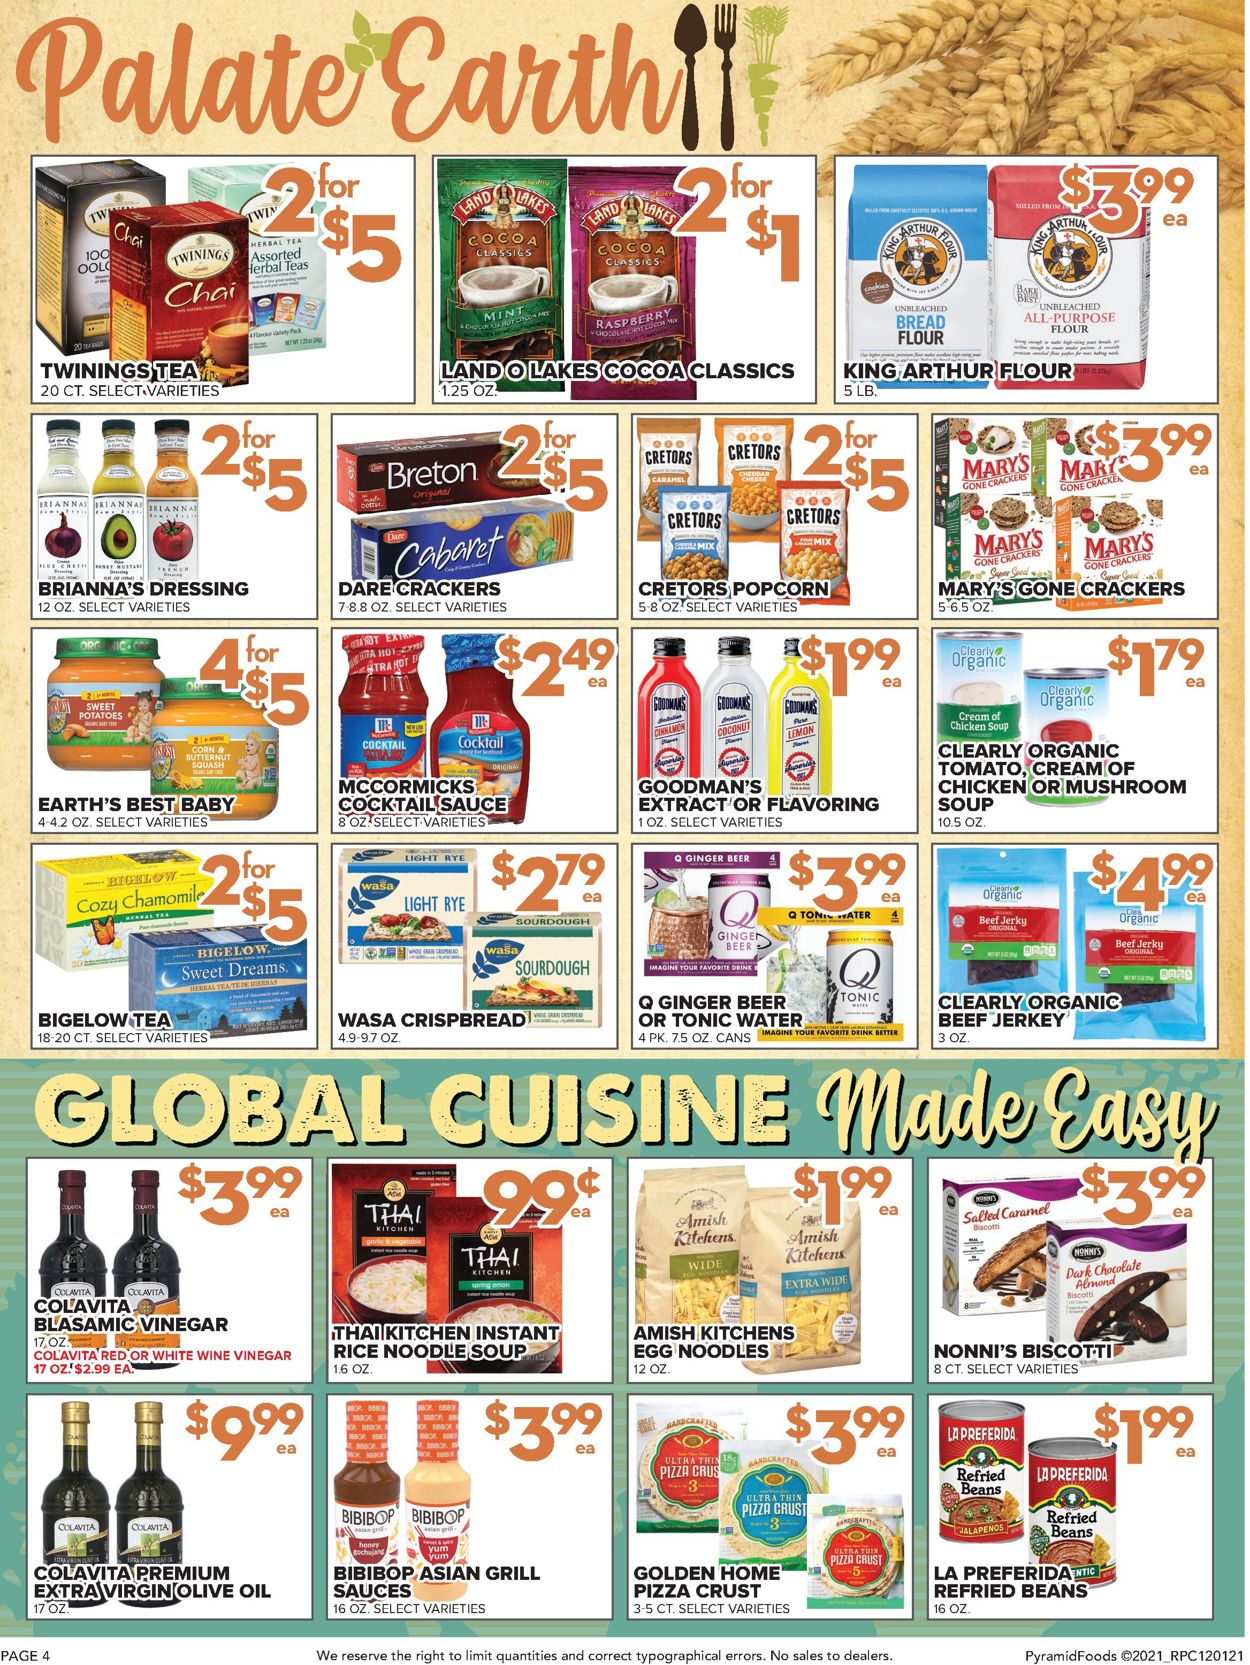 Price Cutter HOLIDAY 2021 Weekly Ad Circular - valid 12/01-12/28/2021 (Page 4)